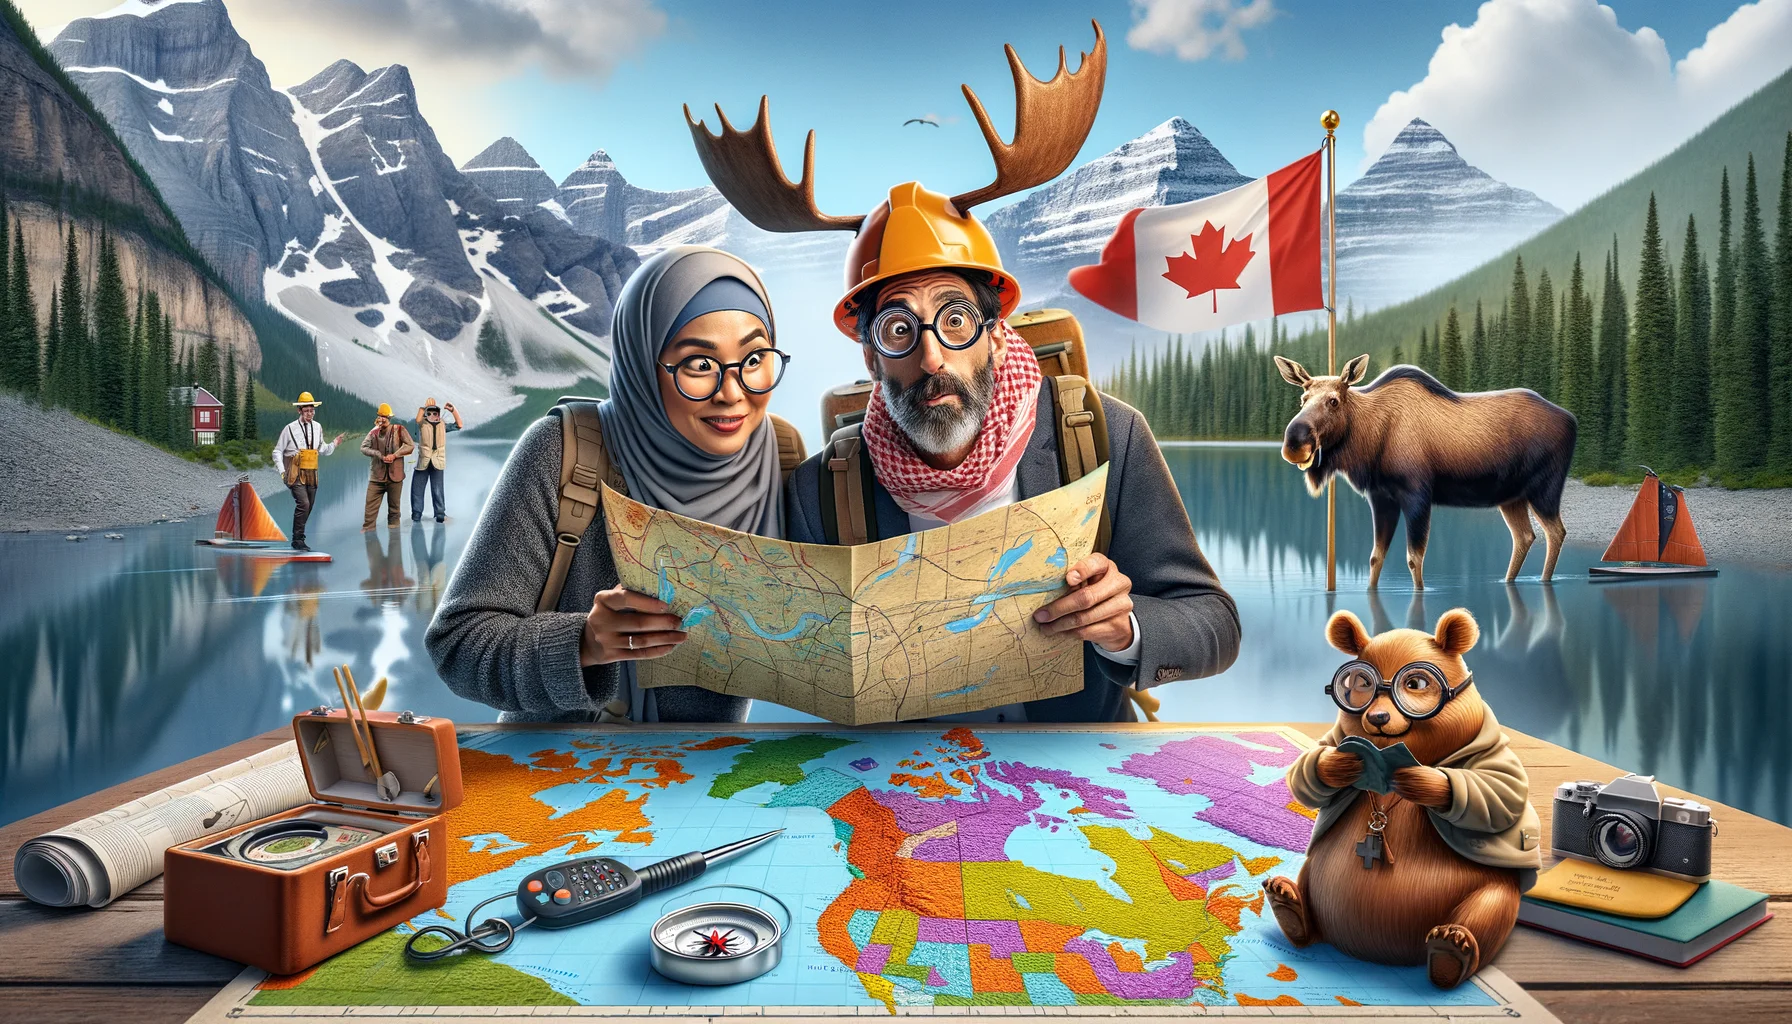 Imagine a humorous scene that perfectly captures the essence of navigating Canada's real estate market. In the foreground, a couple of diverse descent, a South Asian woman and a Middle-Eastern man, both amazingly prepared with treasure maps and compasses, humorously scrutinizing a giant, colorful map with familiar Canadian landmarks and whimsical property icons. In the background, a Moose wearing spectacles and a beaver in a construction helmet signify Canada's unique nature. All this set against picturesque Canadian scenery - snow-capped mountains, a maple leaf-strewn trail, and a serene lake reflecting the calm sky. The scene is rendered in a realistic style.